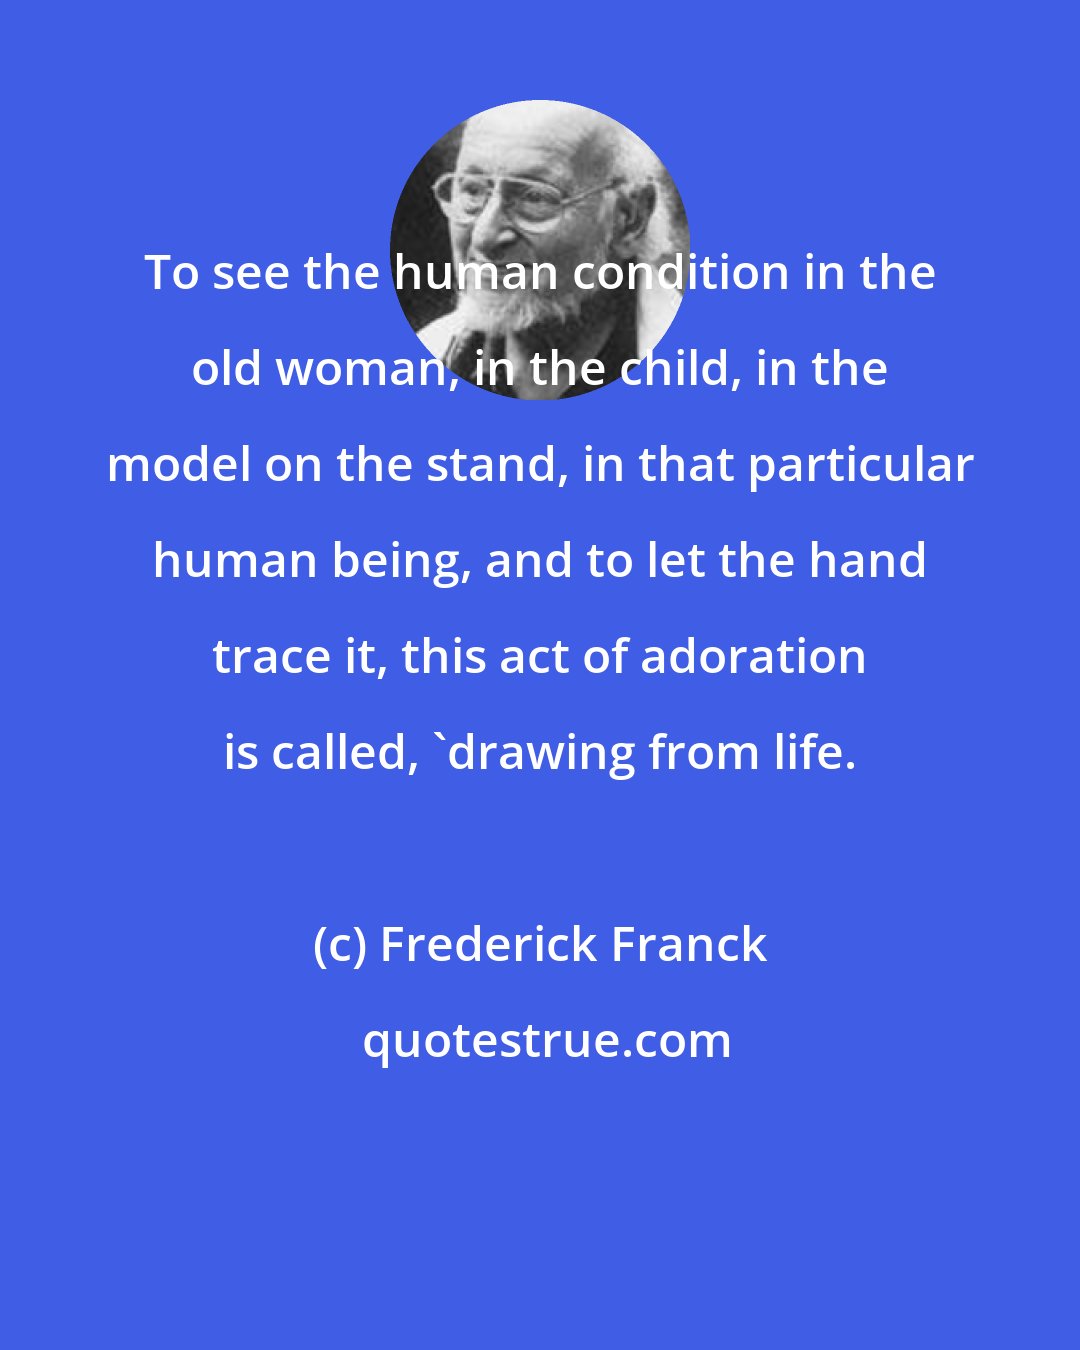 Frederick Franck: To see the human condition in the old woman, in the child, in the model on the stand, in that particular human being, and to let the hand trace it, this act of adoration is called, 'drawing from life.